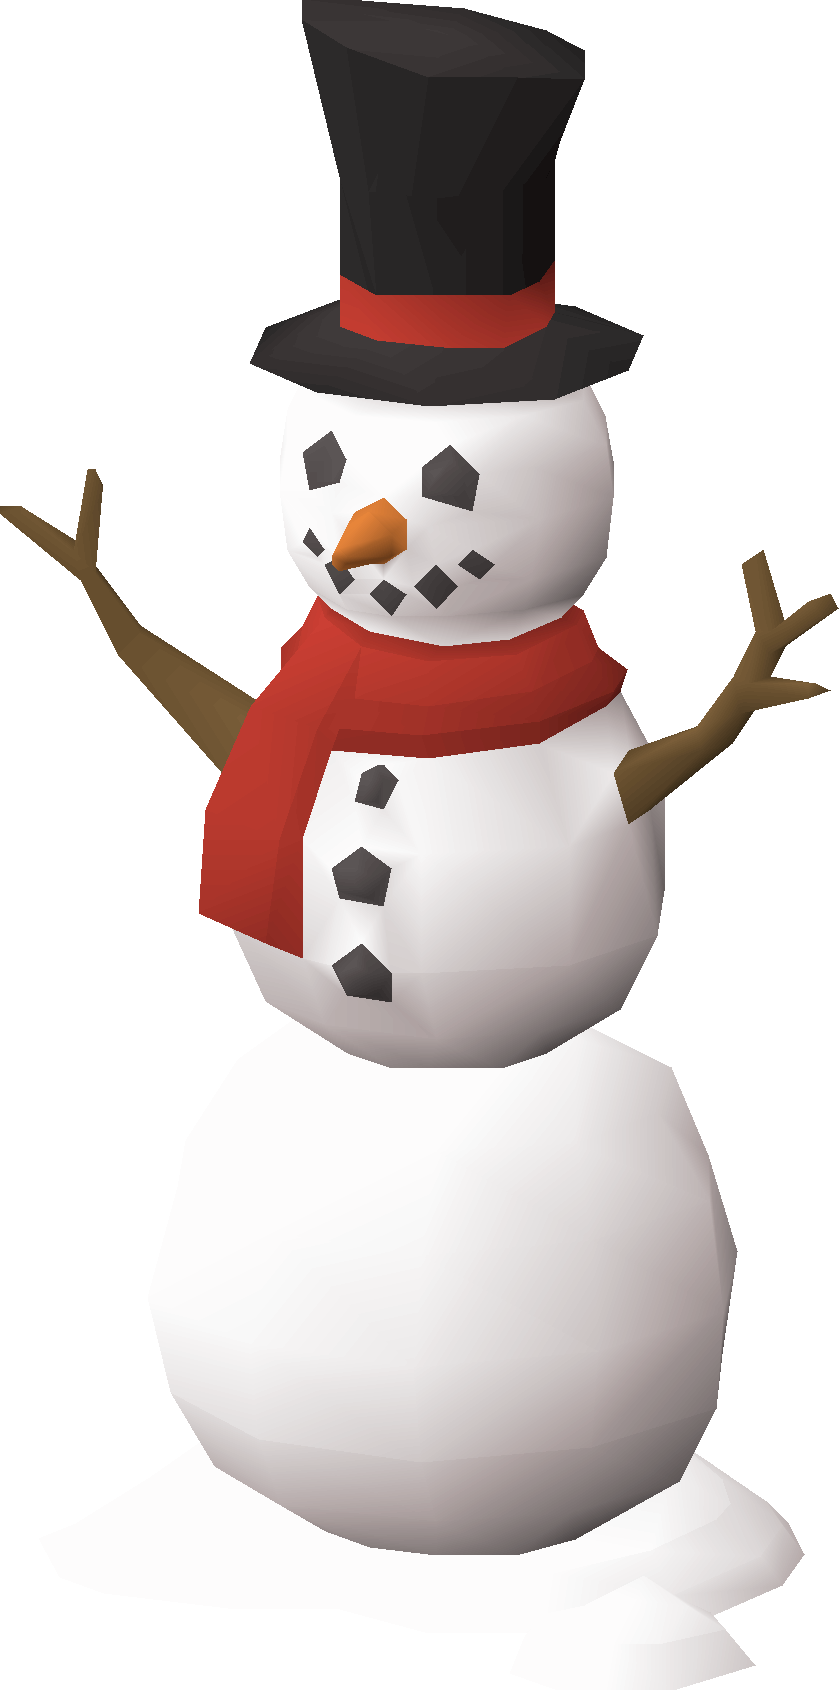 A player transformed into a traditional snowman.